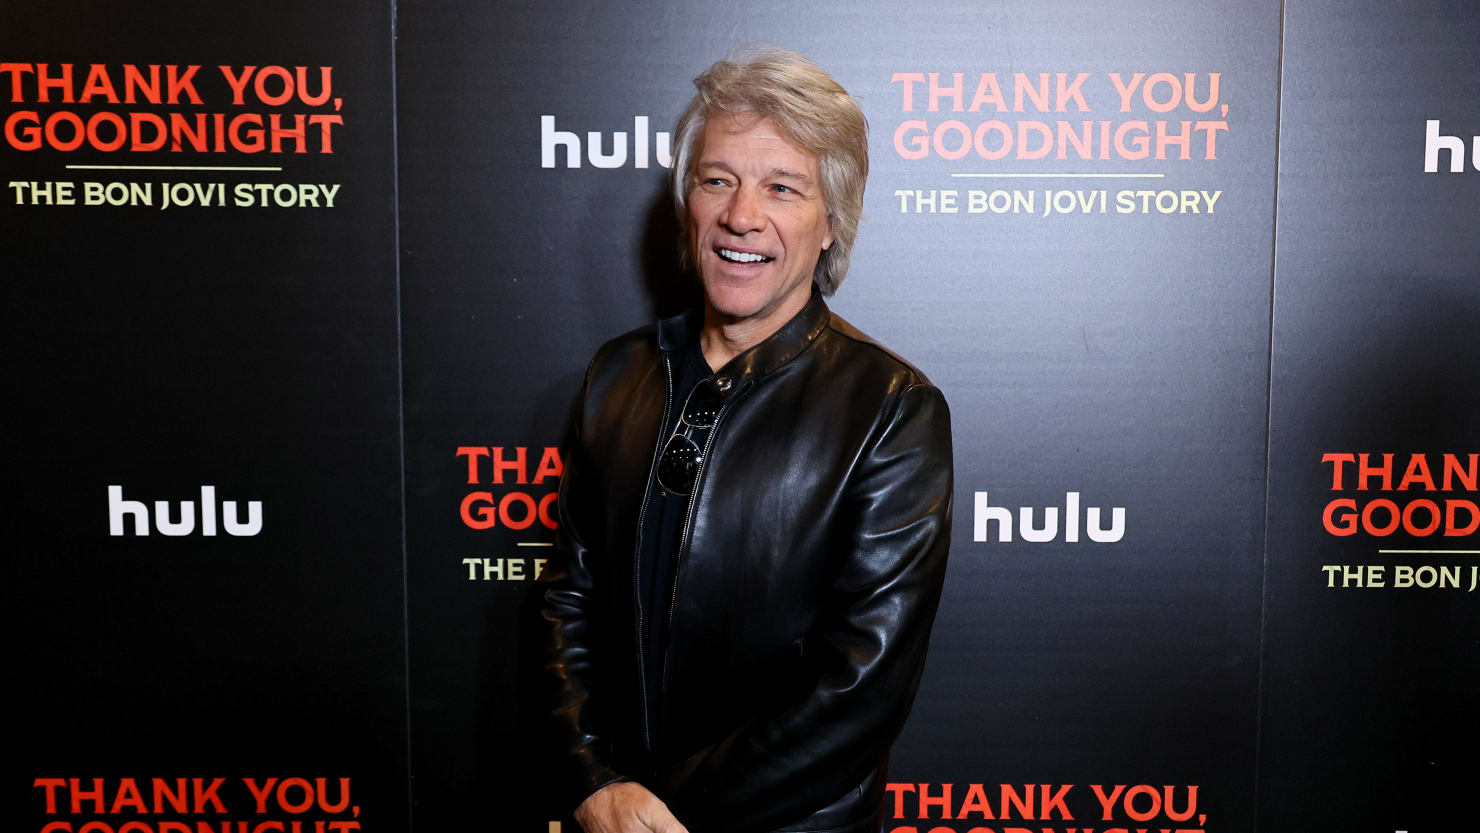 Jon Bon Jovi’s Wife Dorothea Hurley Missing From Doc Screening After Rocker’s Confession in Marriage